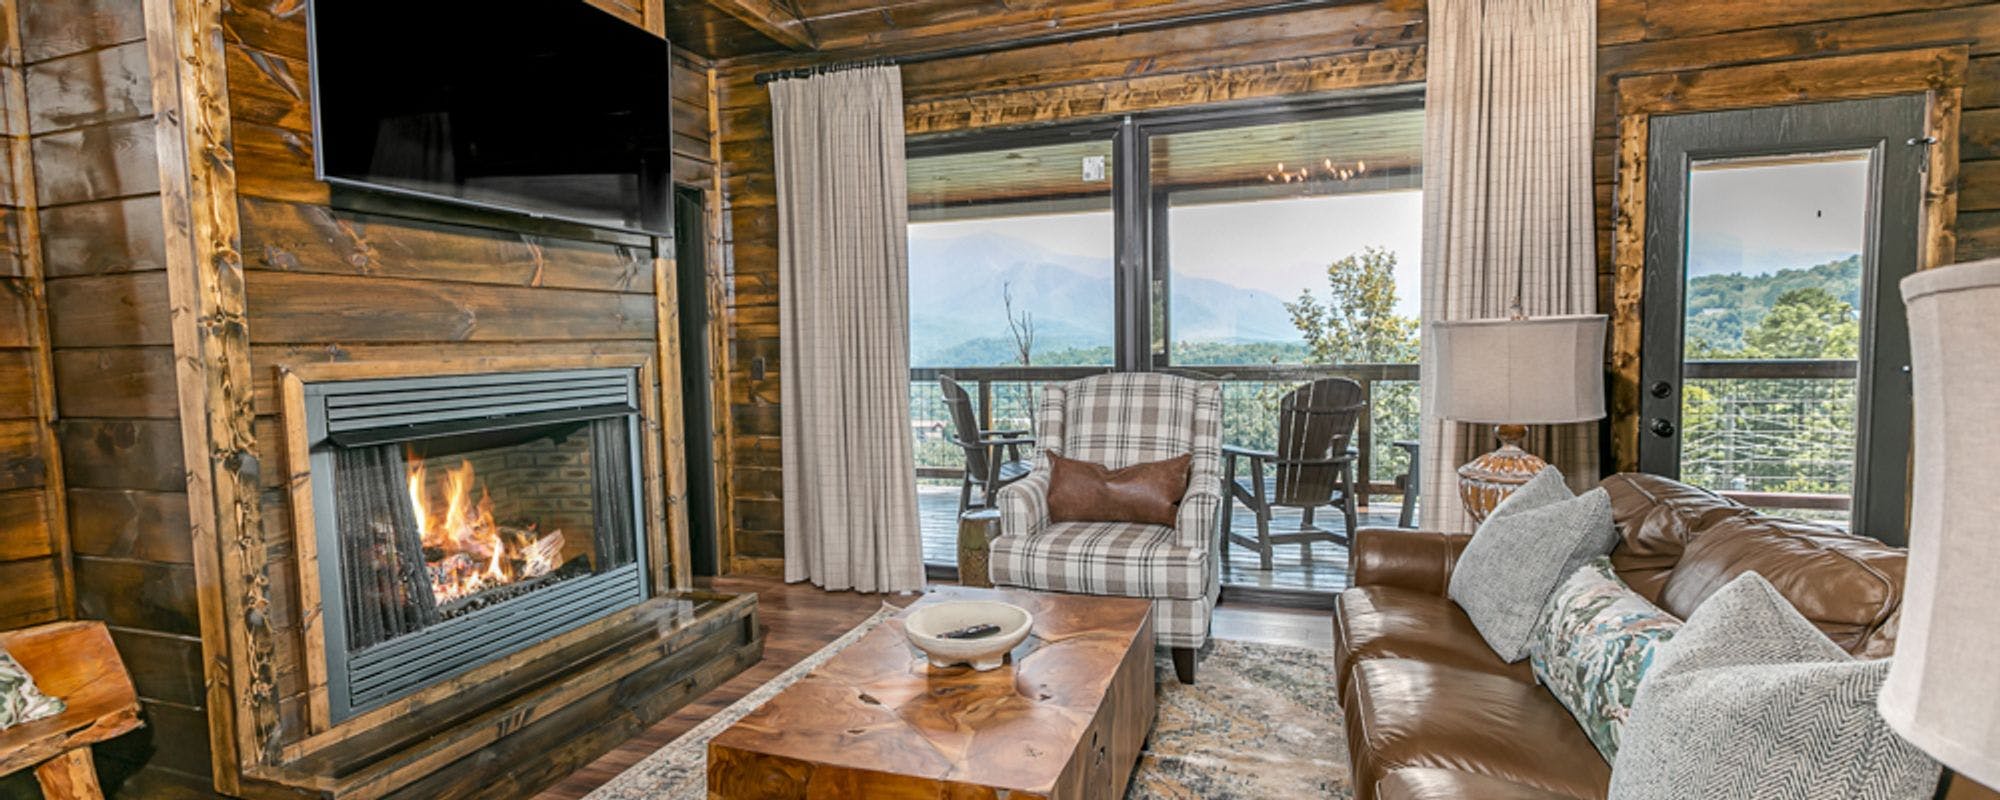 Fireplace in cabin with view